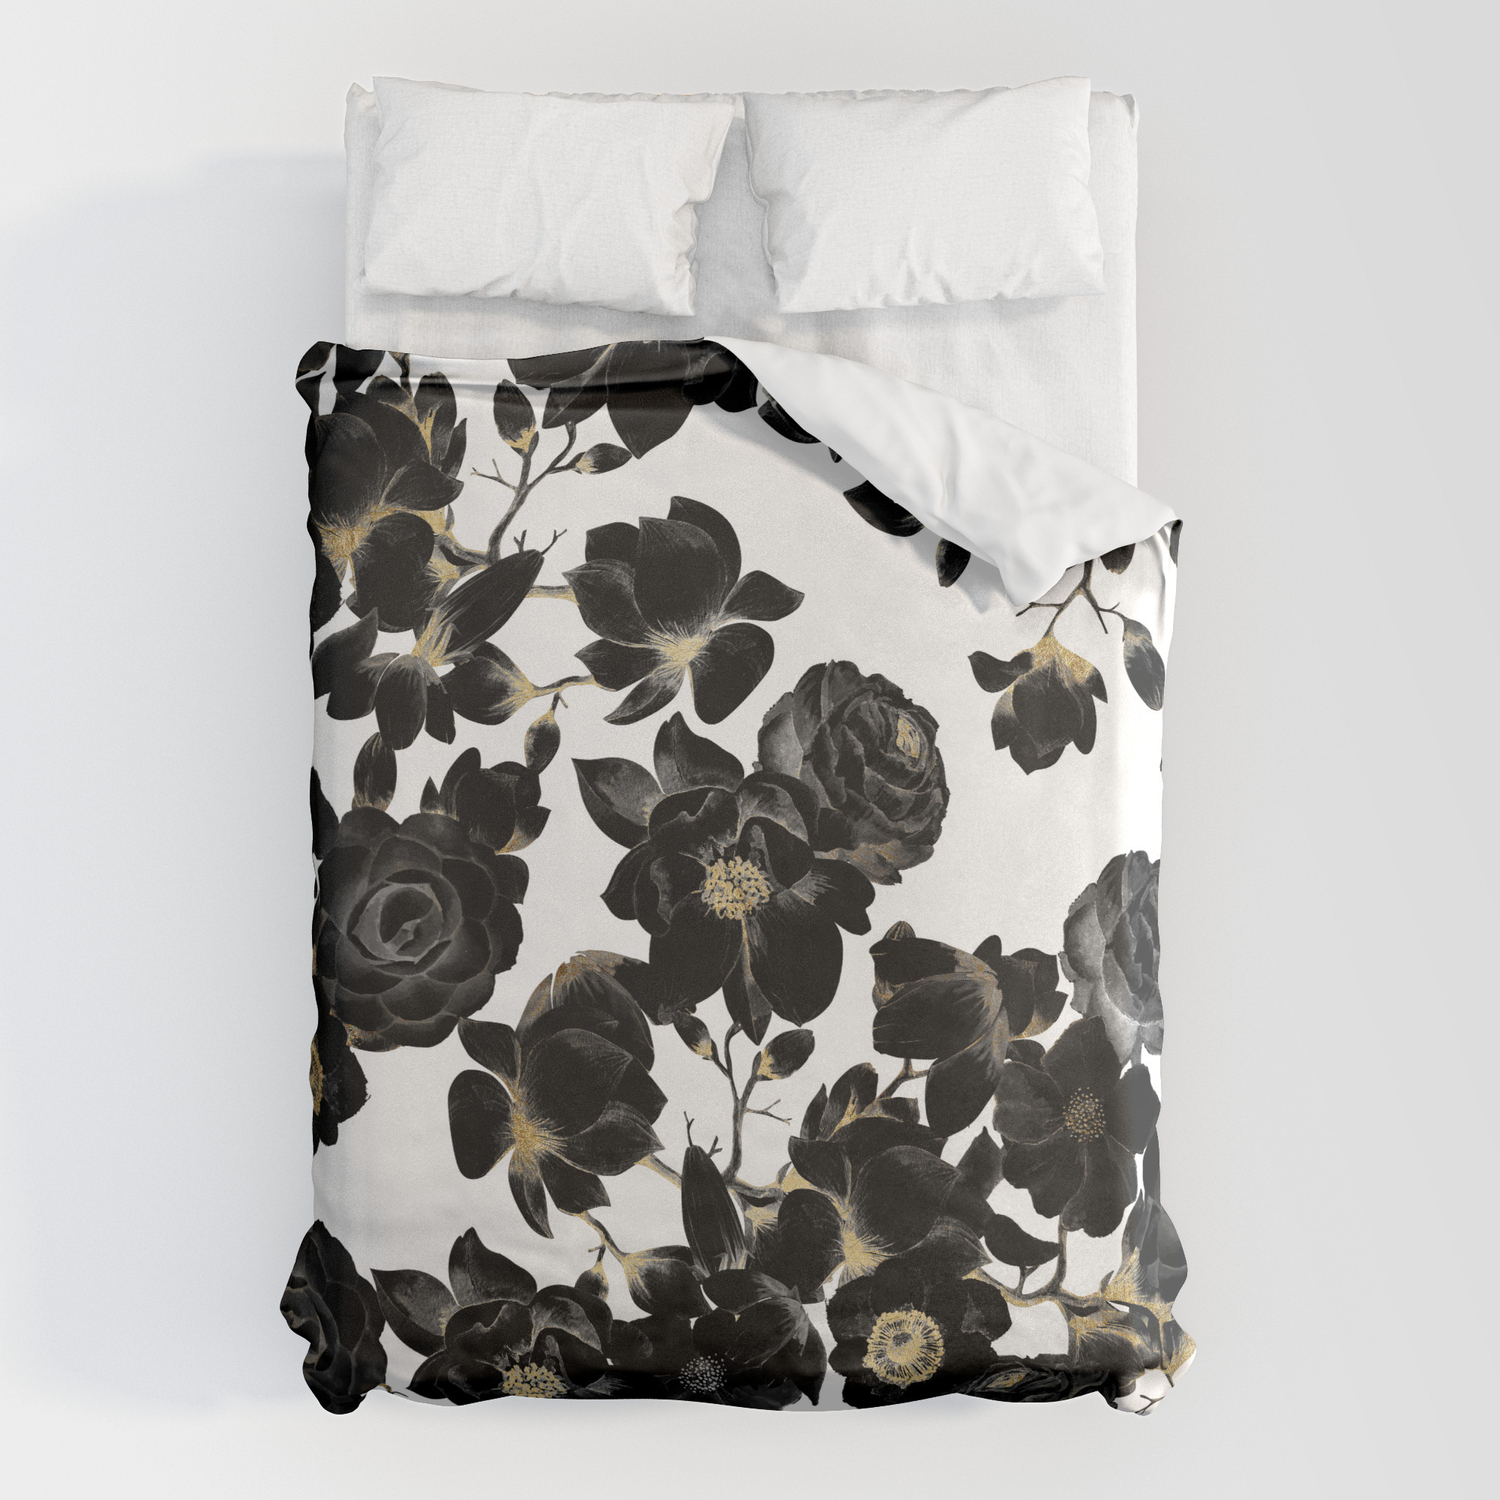 DOUBLE BED DUVET COVER SET REMI BLACK PATCHWORK GOLD FLORAL DAMASK ABSTRACT 